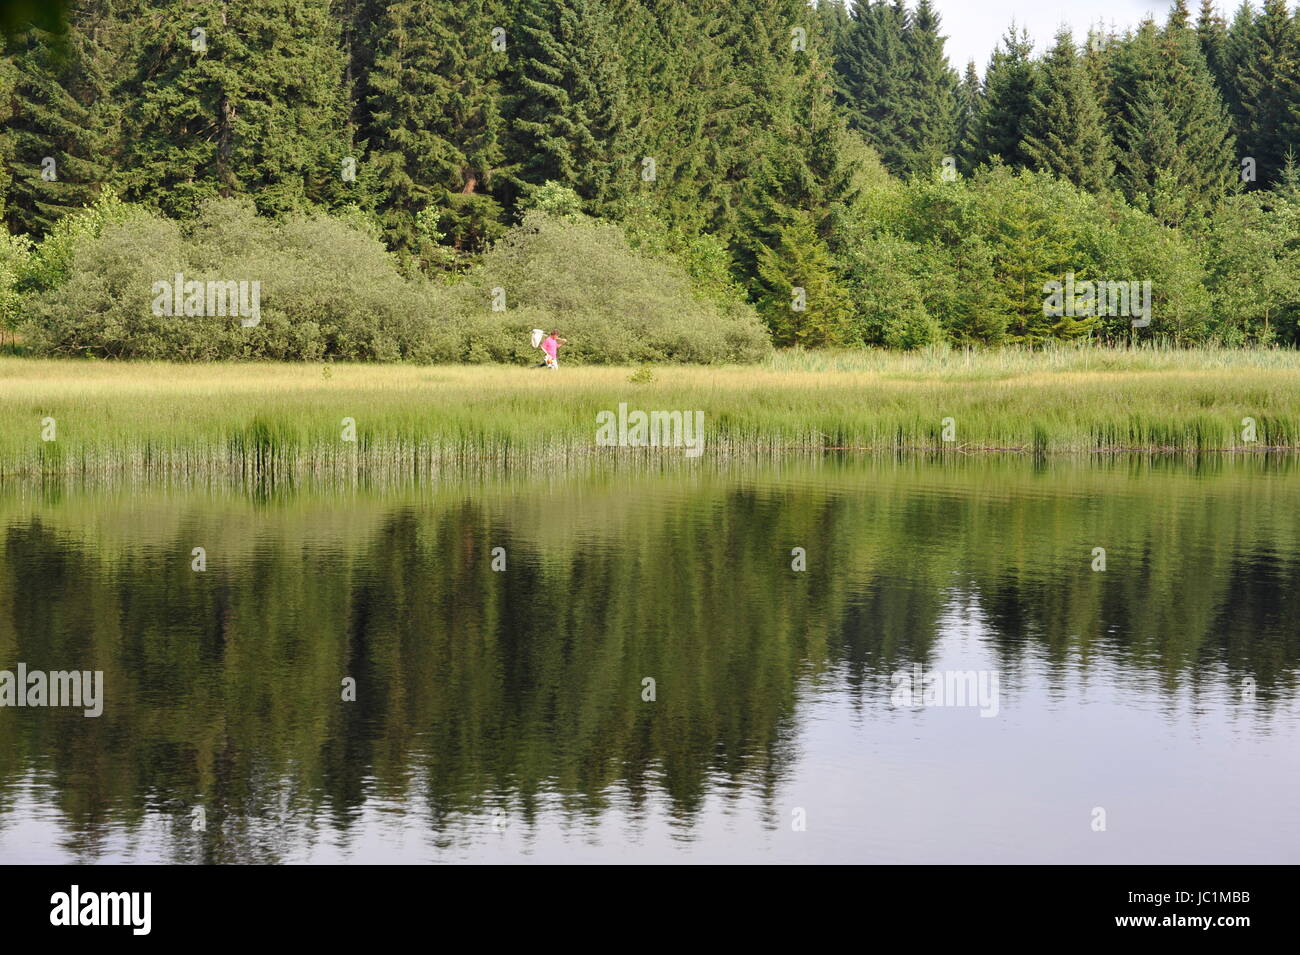 Grass in water surface,Marienteich,Germany. Stock Photo